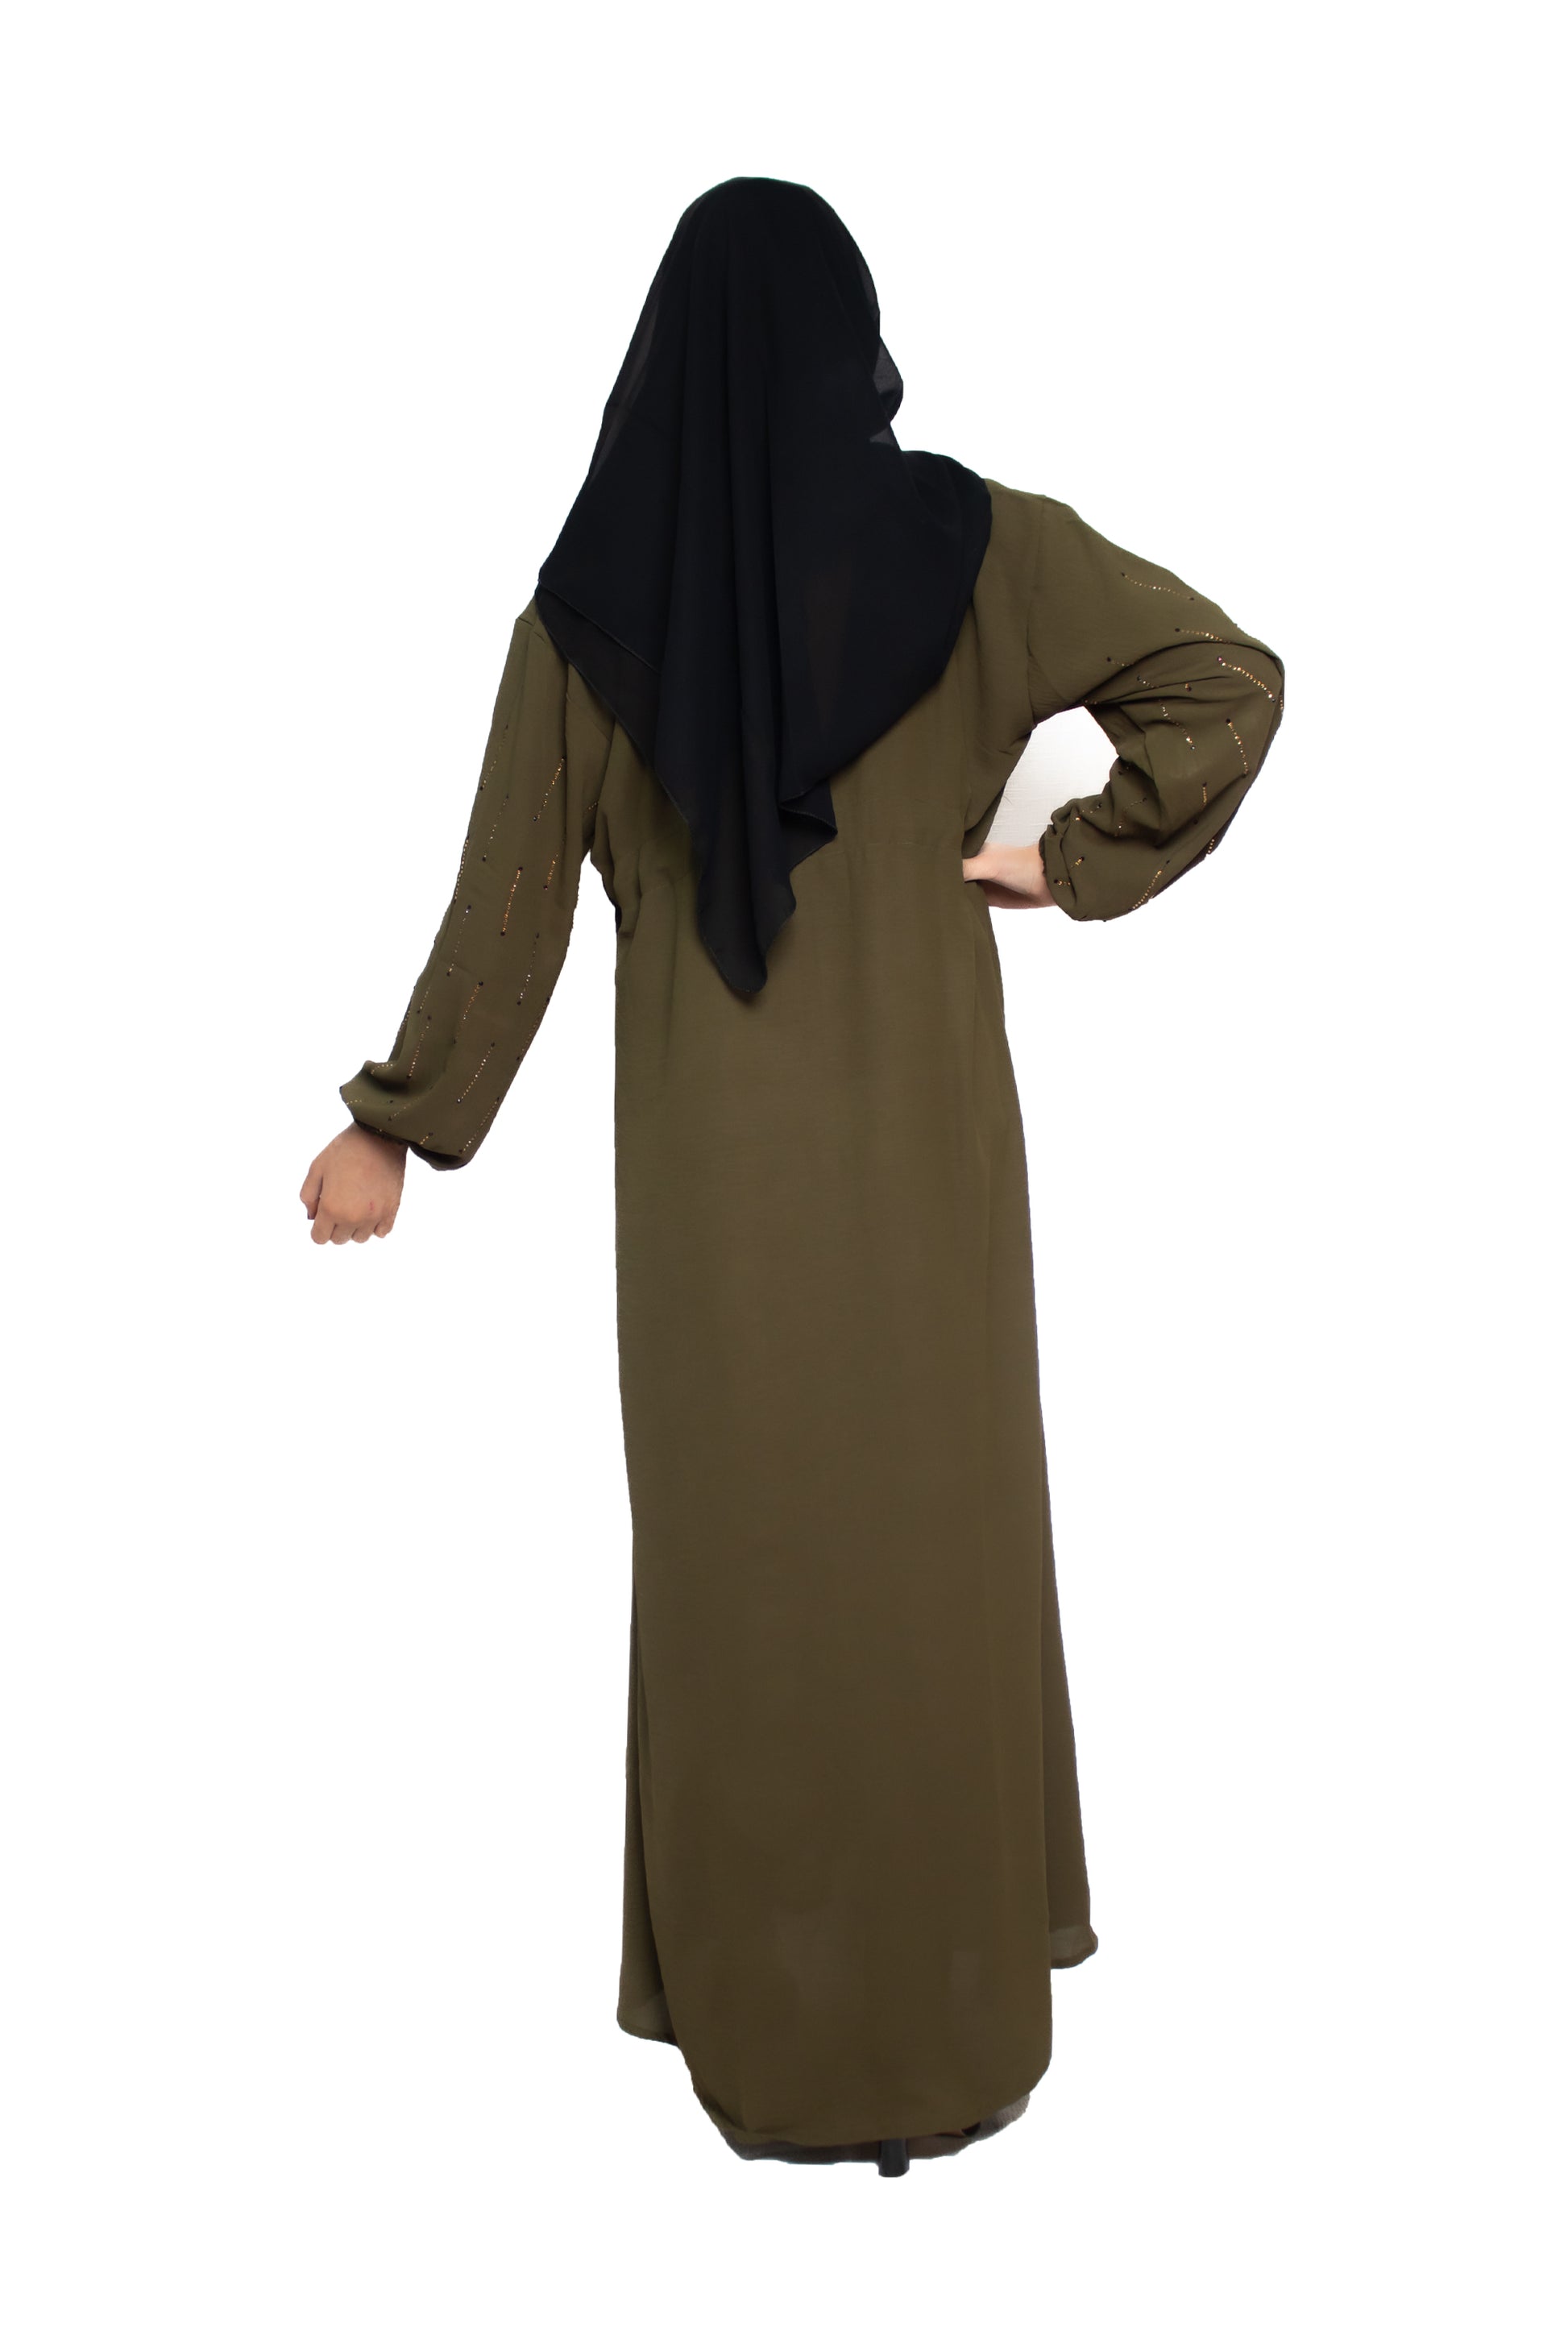 Modest City Self Design Mehandi Front Button With Ribbon Abaya or Burqa for Women & Girls-Series Laiba